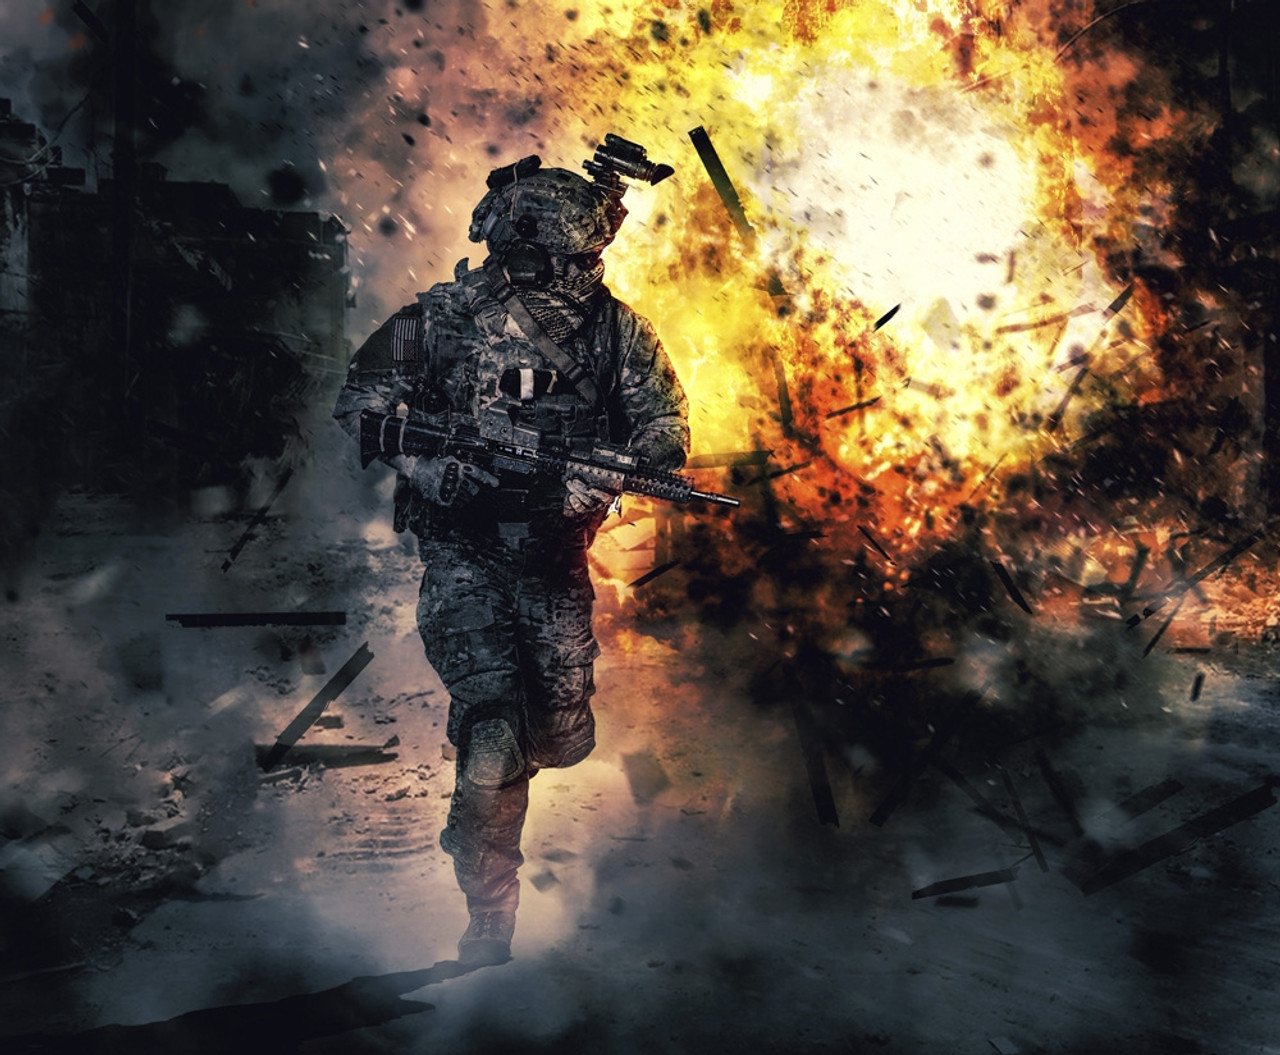 Army soldier in action. Great explosion with fire and smoke billows in the  background. Poster Print by Oleg Zabielin/Sto - Item # VARPSTZAB103494M -  Posterazzi